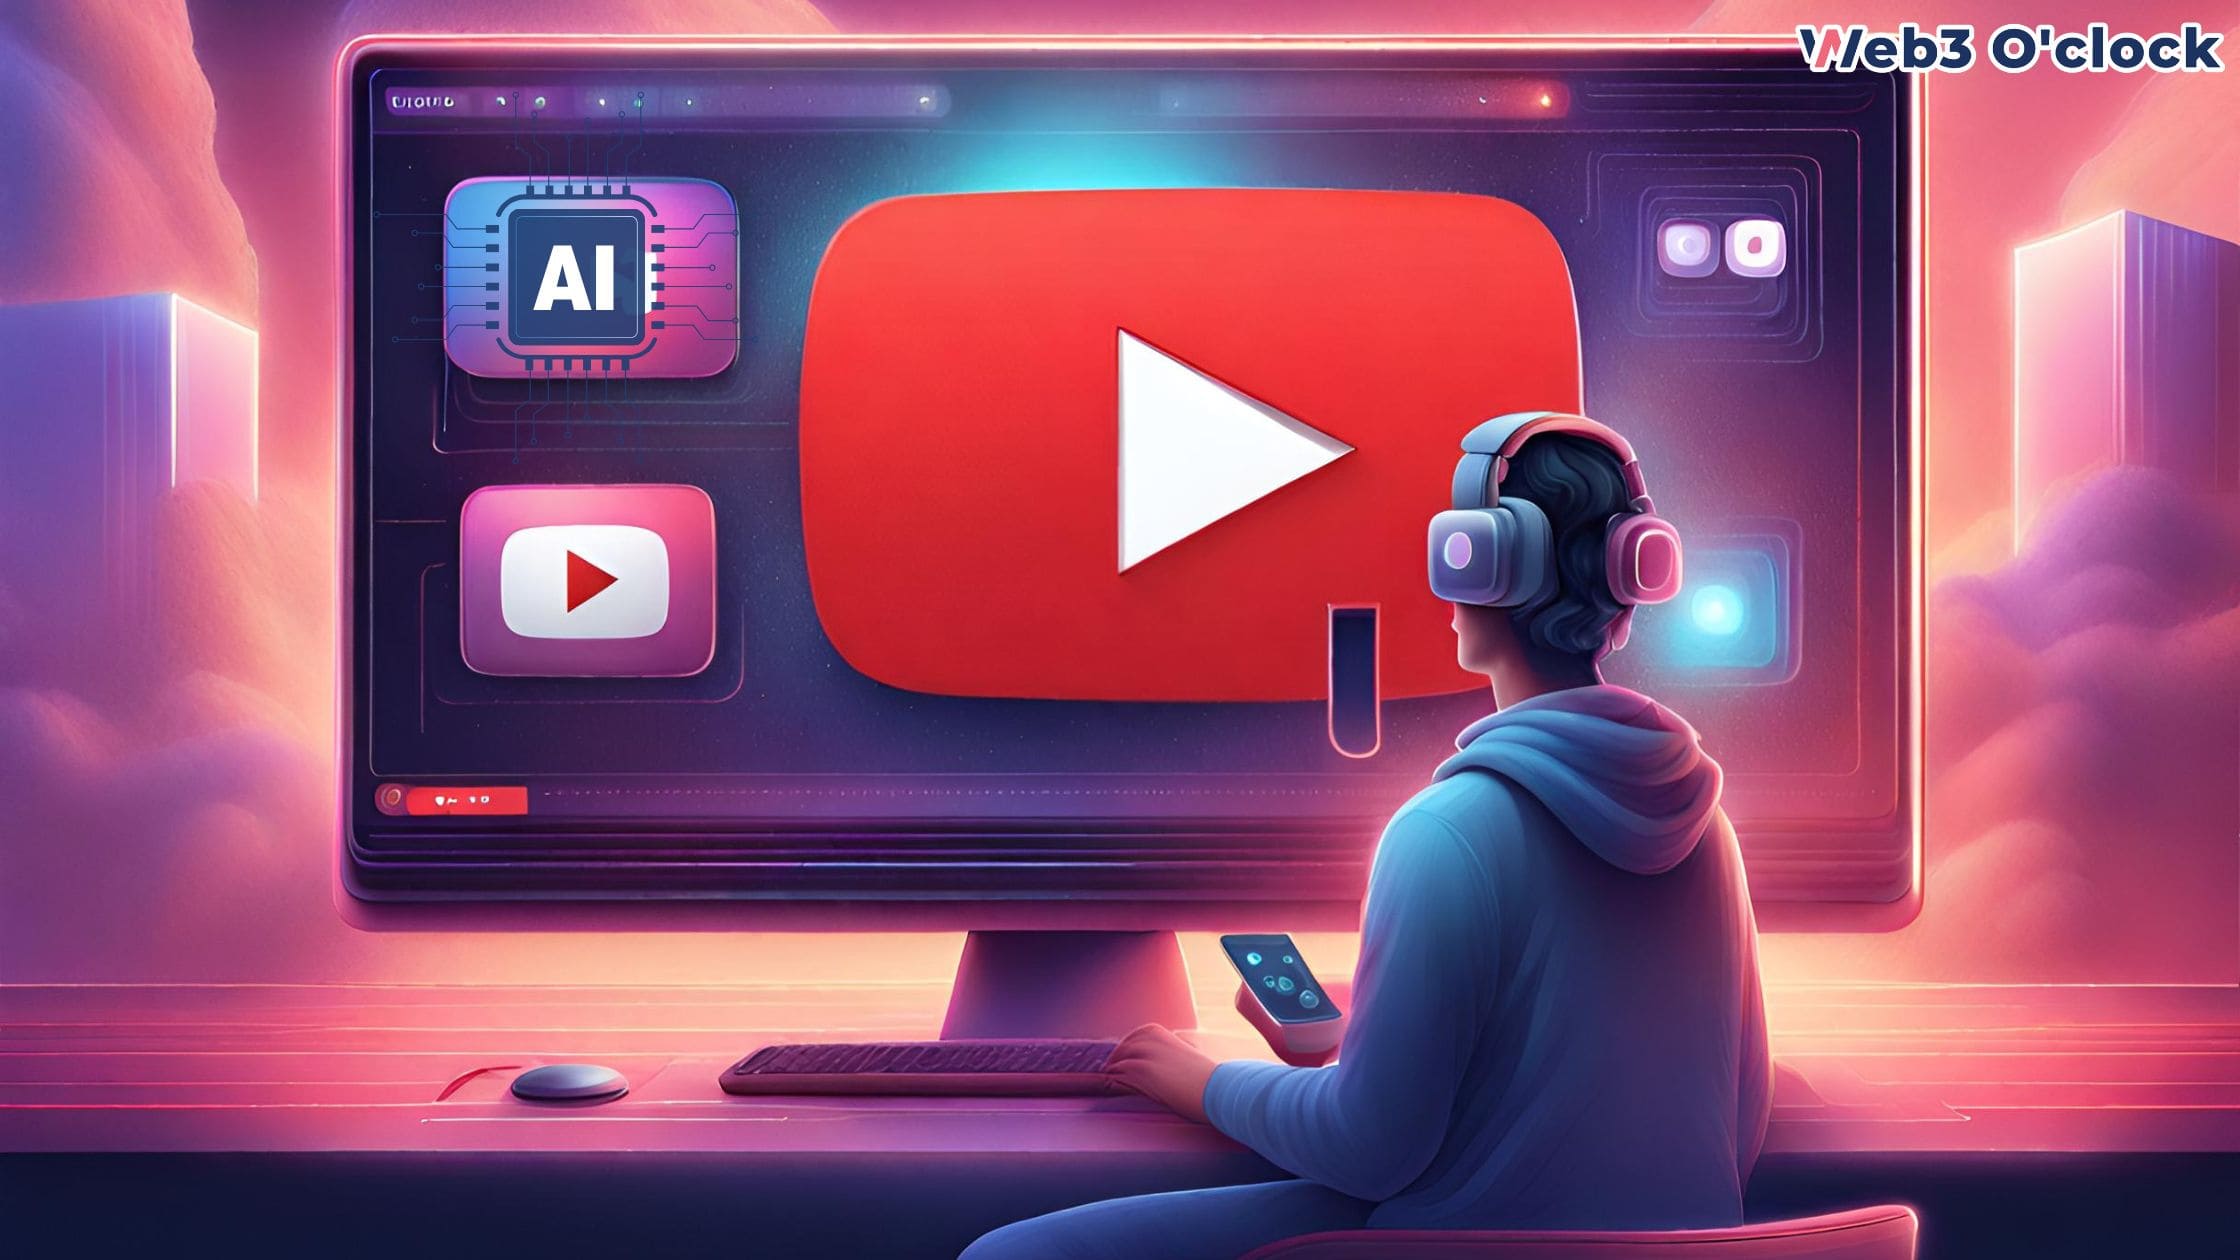 YouTube Premium's new AI feature by web3 o'clock